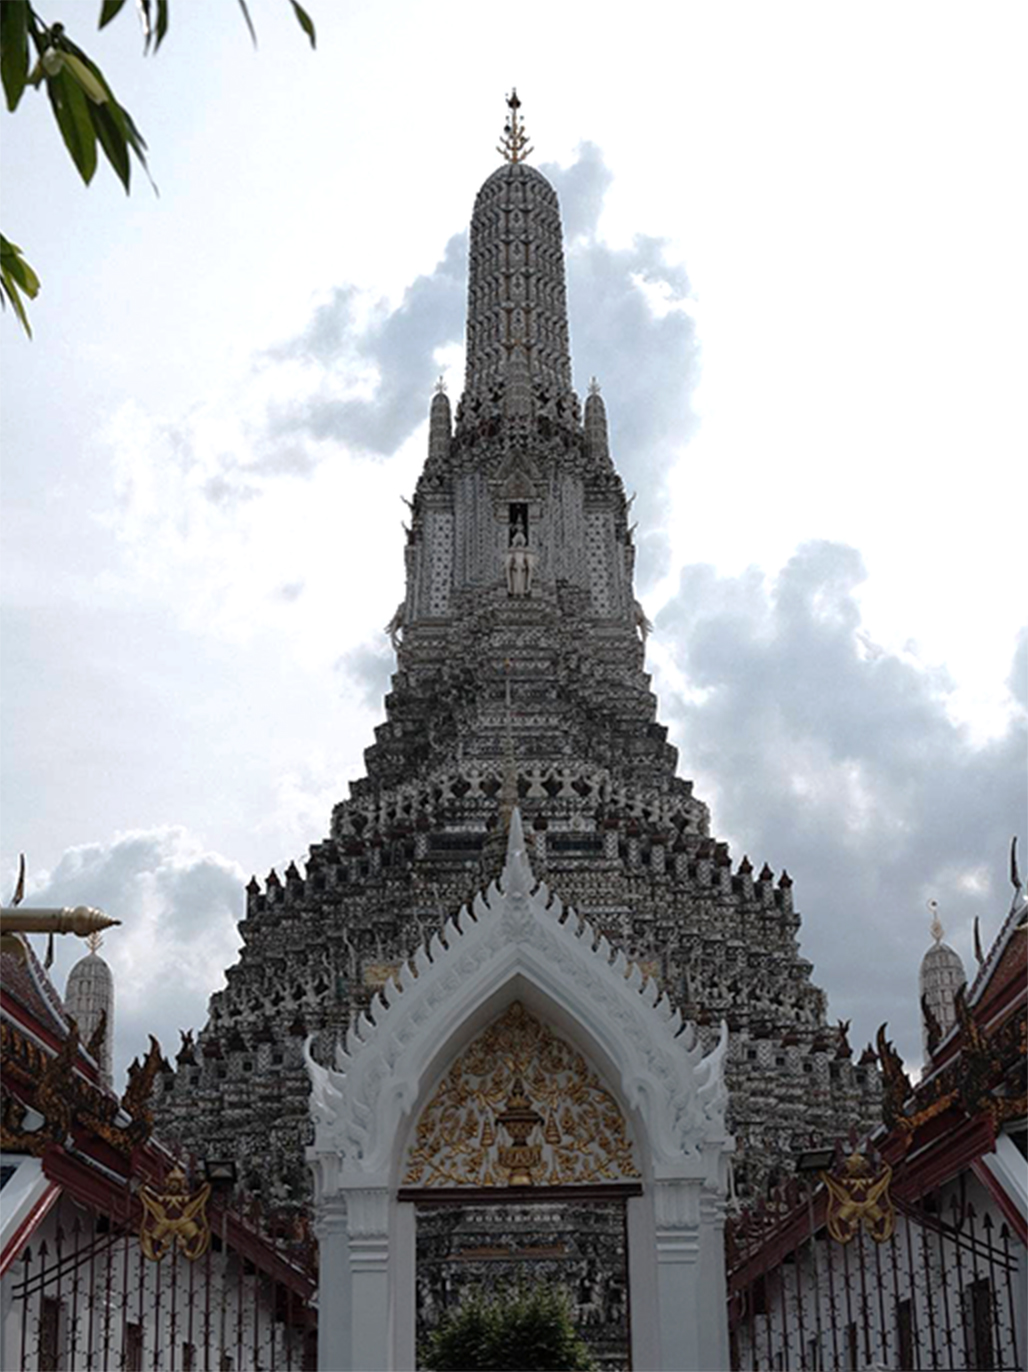 This is Phra Prang at Wat Arun, a Buddhist temple in Bangkok, taken in August 2023. Phra Prang means the pagoda of a Buddhist temple.